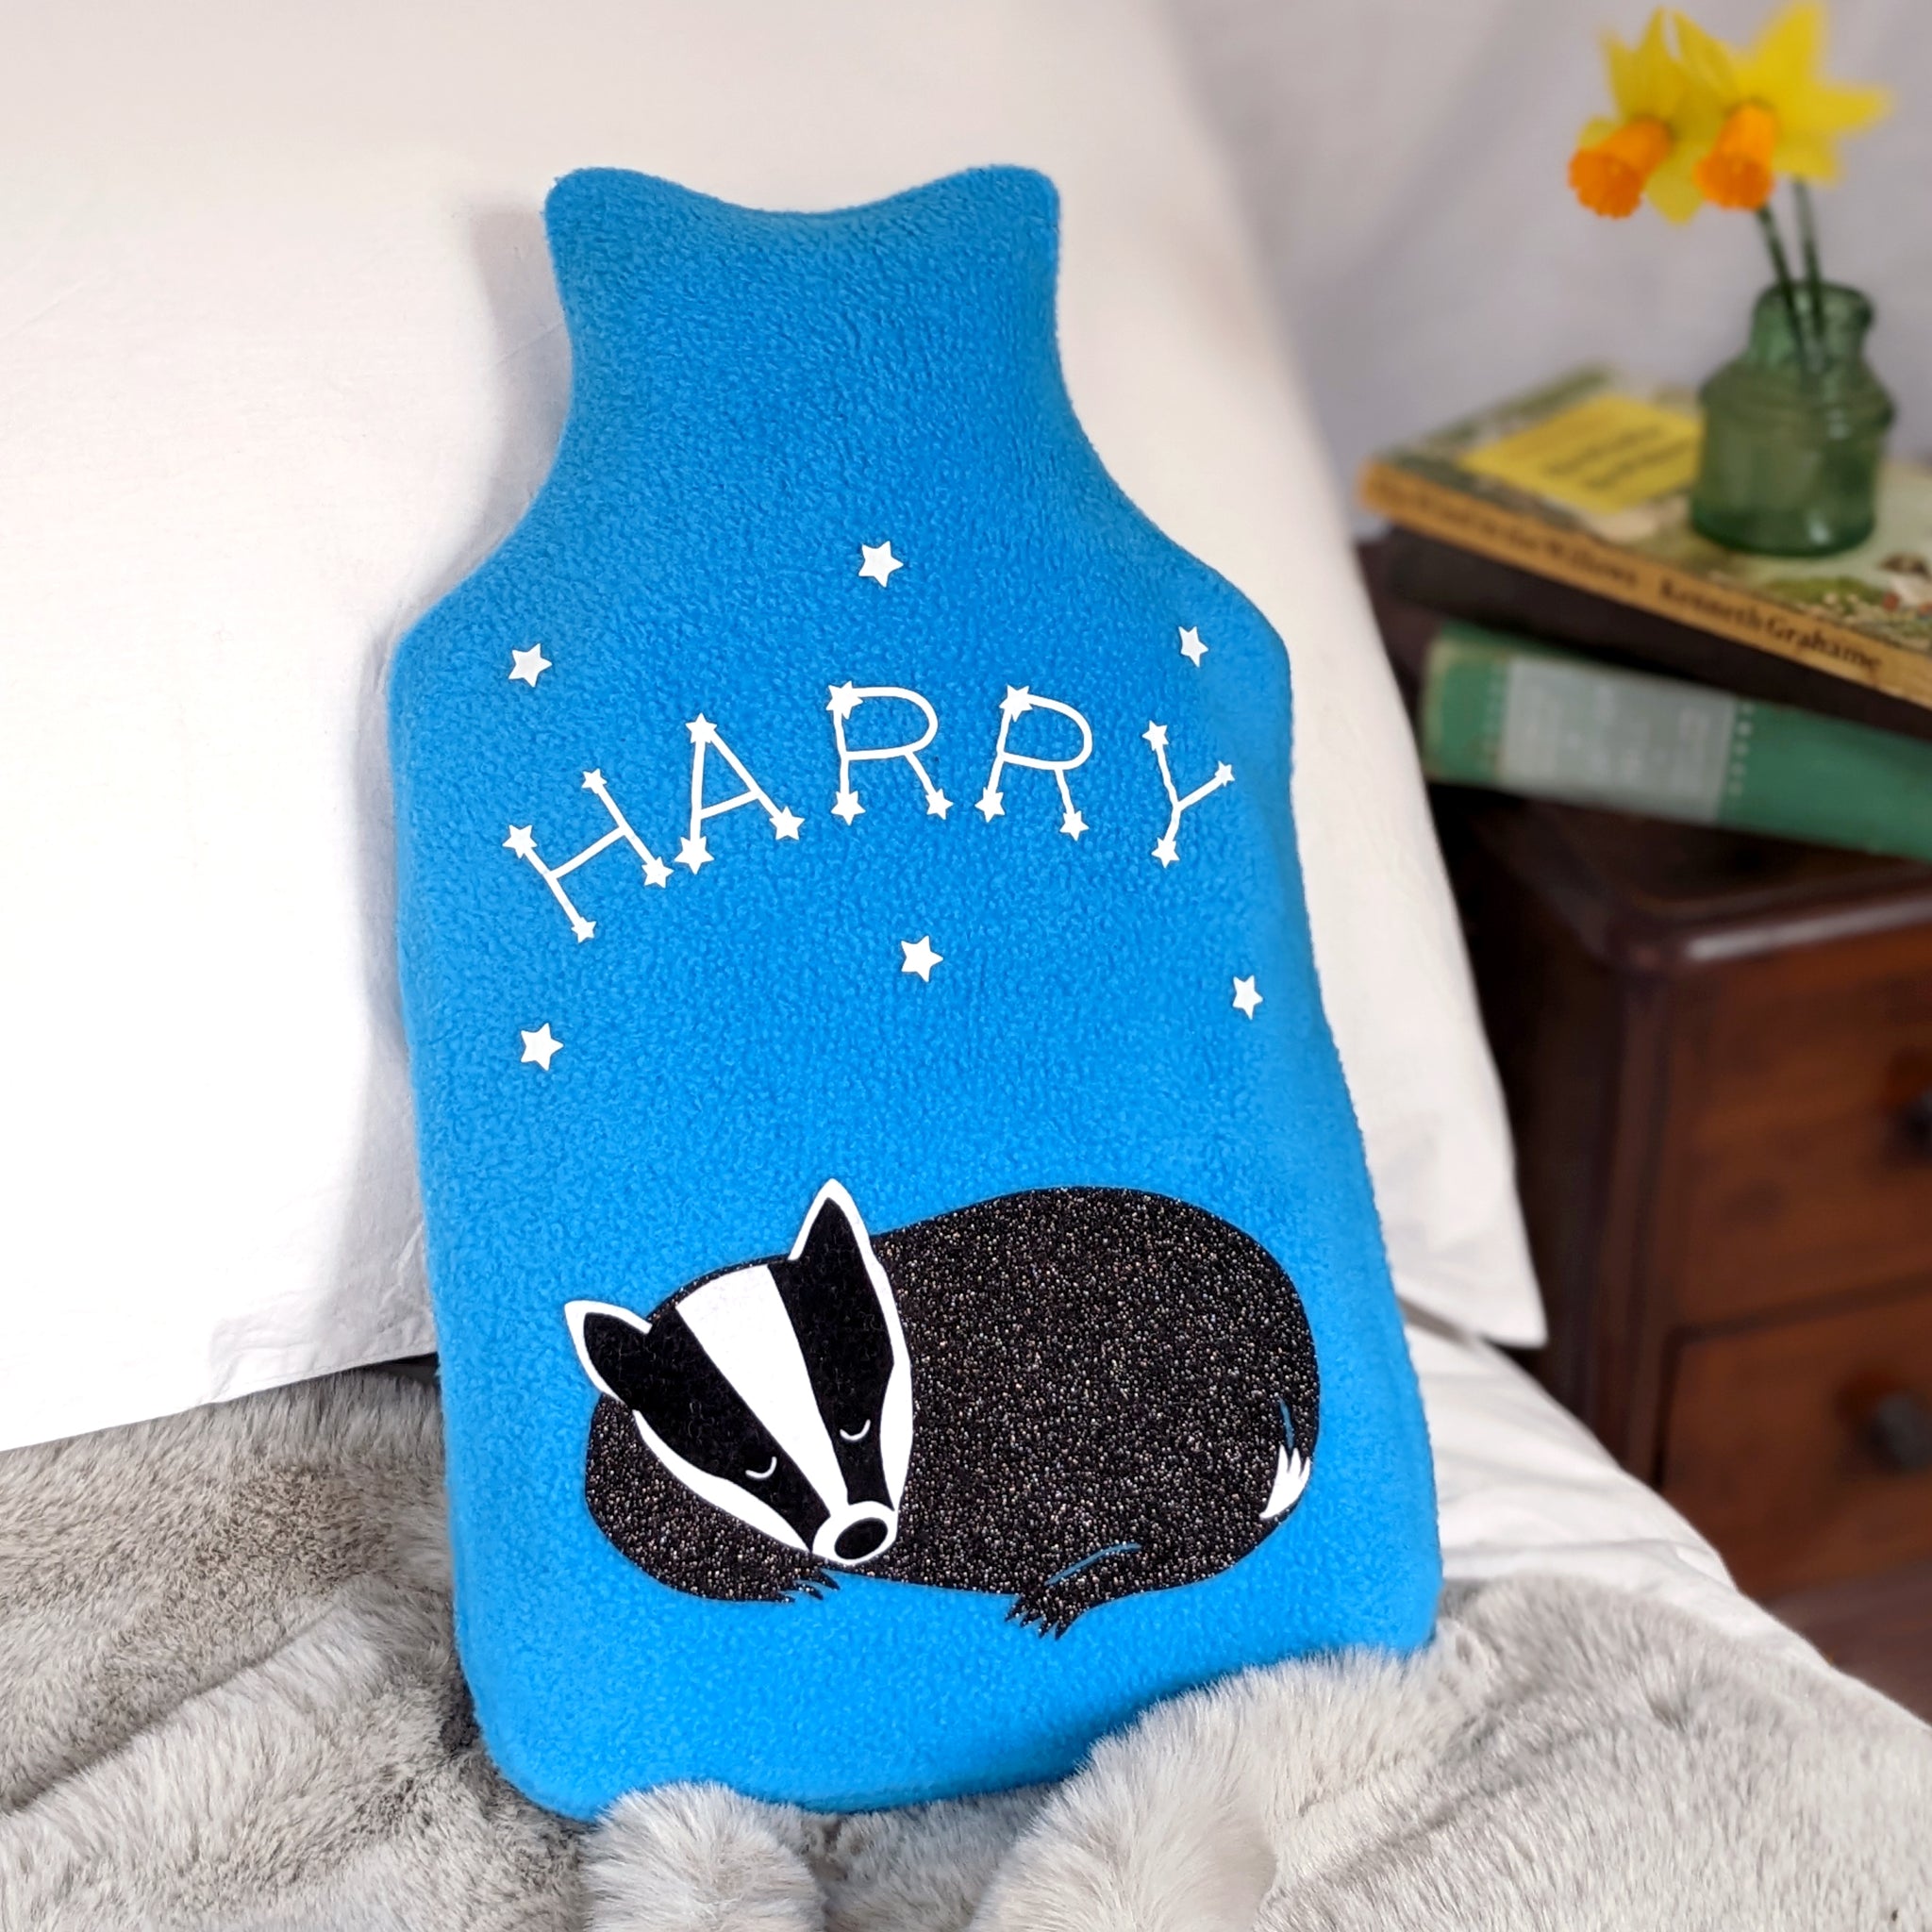 A photo of a hot water bottle cover in turquoise fleece with a cute baby badger design. The badger is sleeping soundly under a starry night sky filled with constellations and twinkling stars.